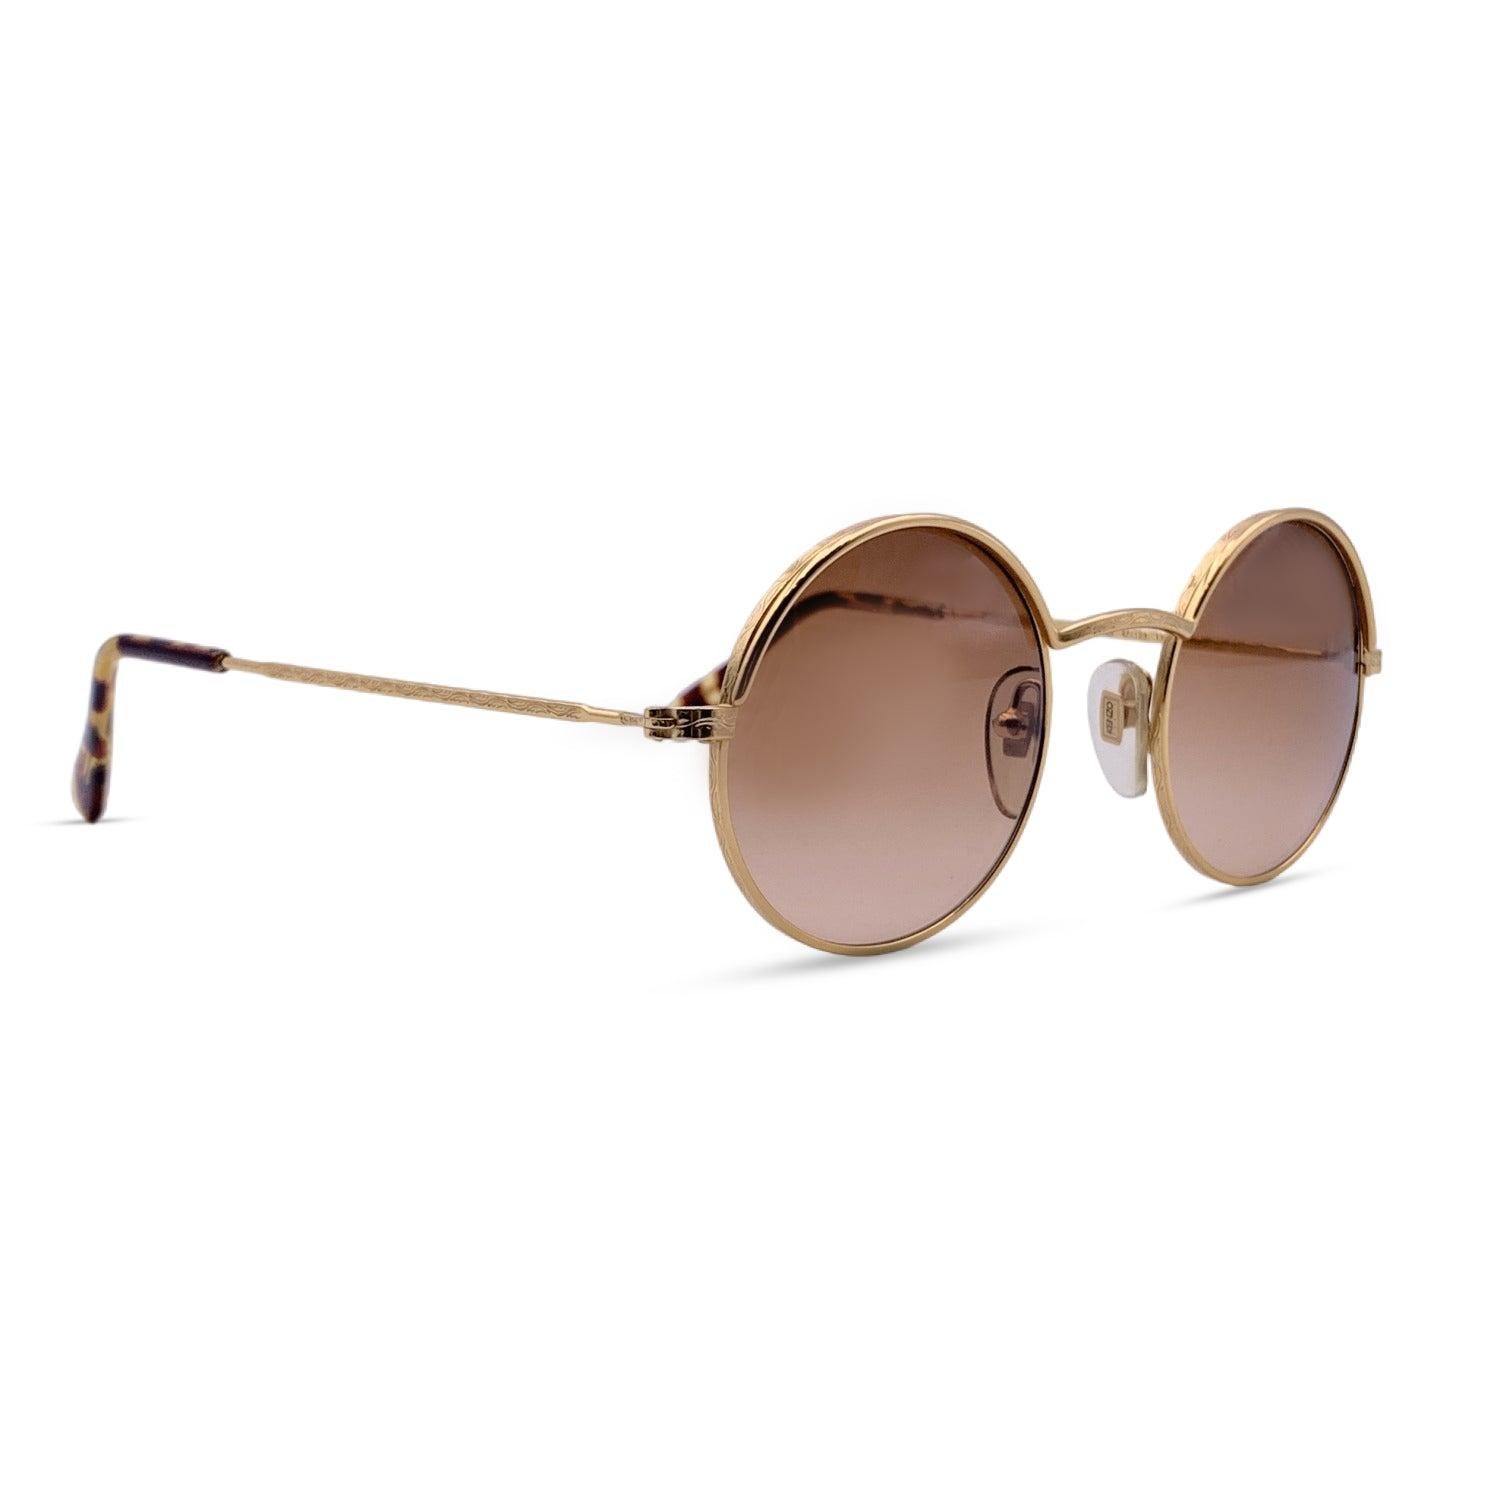 KENZO Round Vintage Gold Unisex Sunglasses Oscar K 13 47/23 135 mm In Excellent Condition For Sale In Rome, Rome